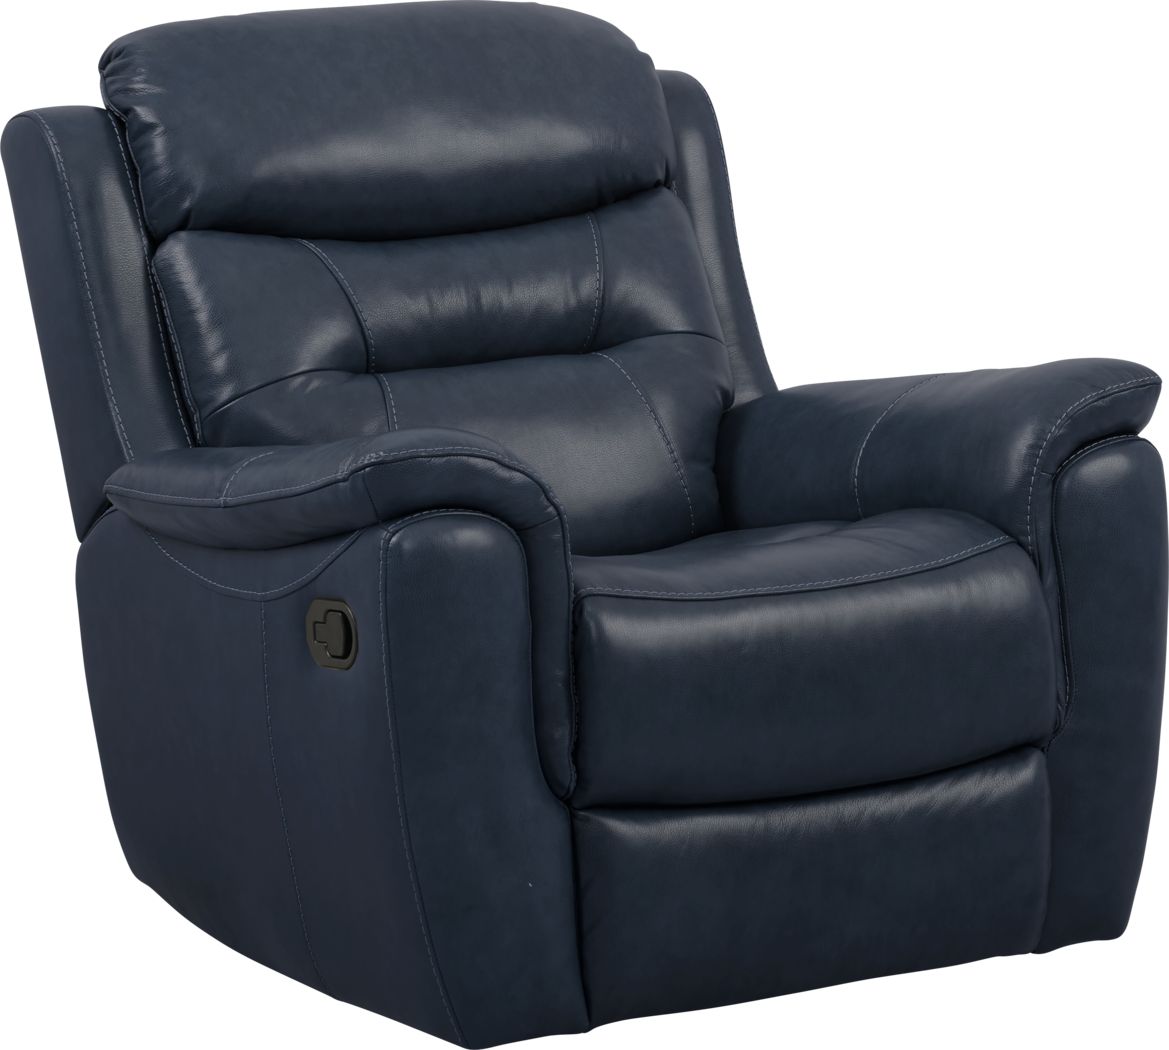 Sabella Navy Leather Glider Recliner Rooms To Go